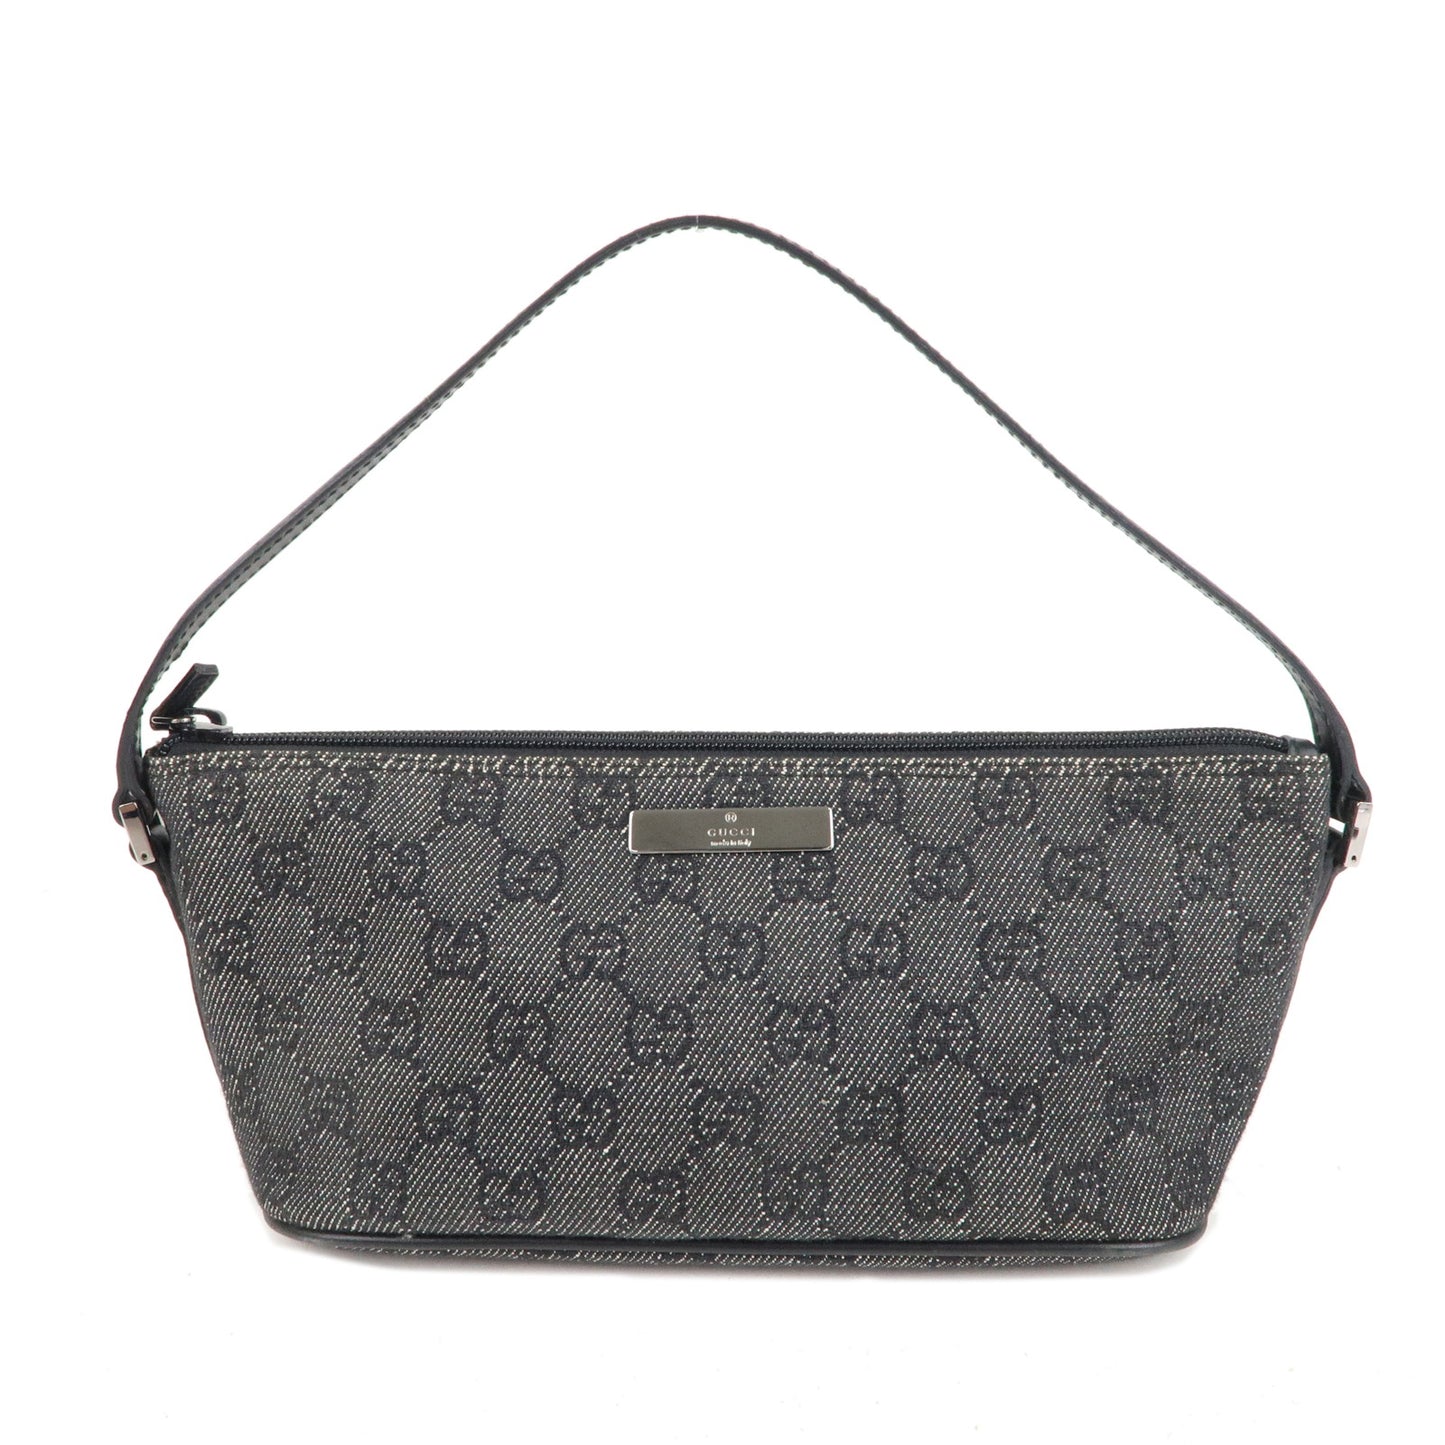 GUCCI-Boat-Bag-GG-Canvas-Leather-Hand-Bag-Pouch-Black-07198